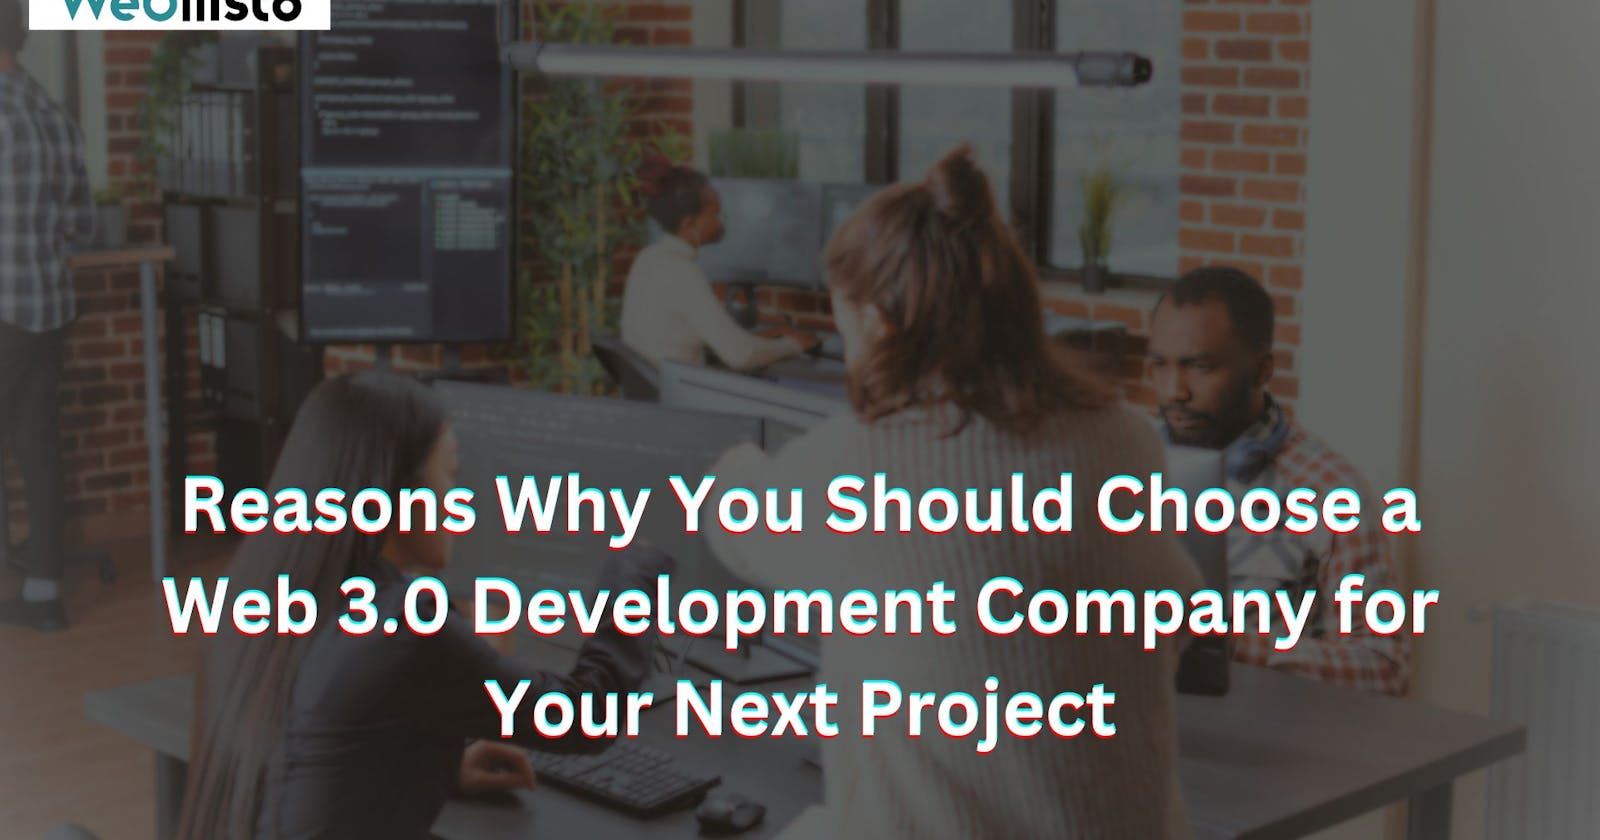 Reasons Why You Should Choose a Web 3.0 Development Company for Your Next Project